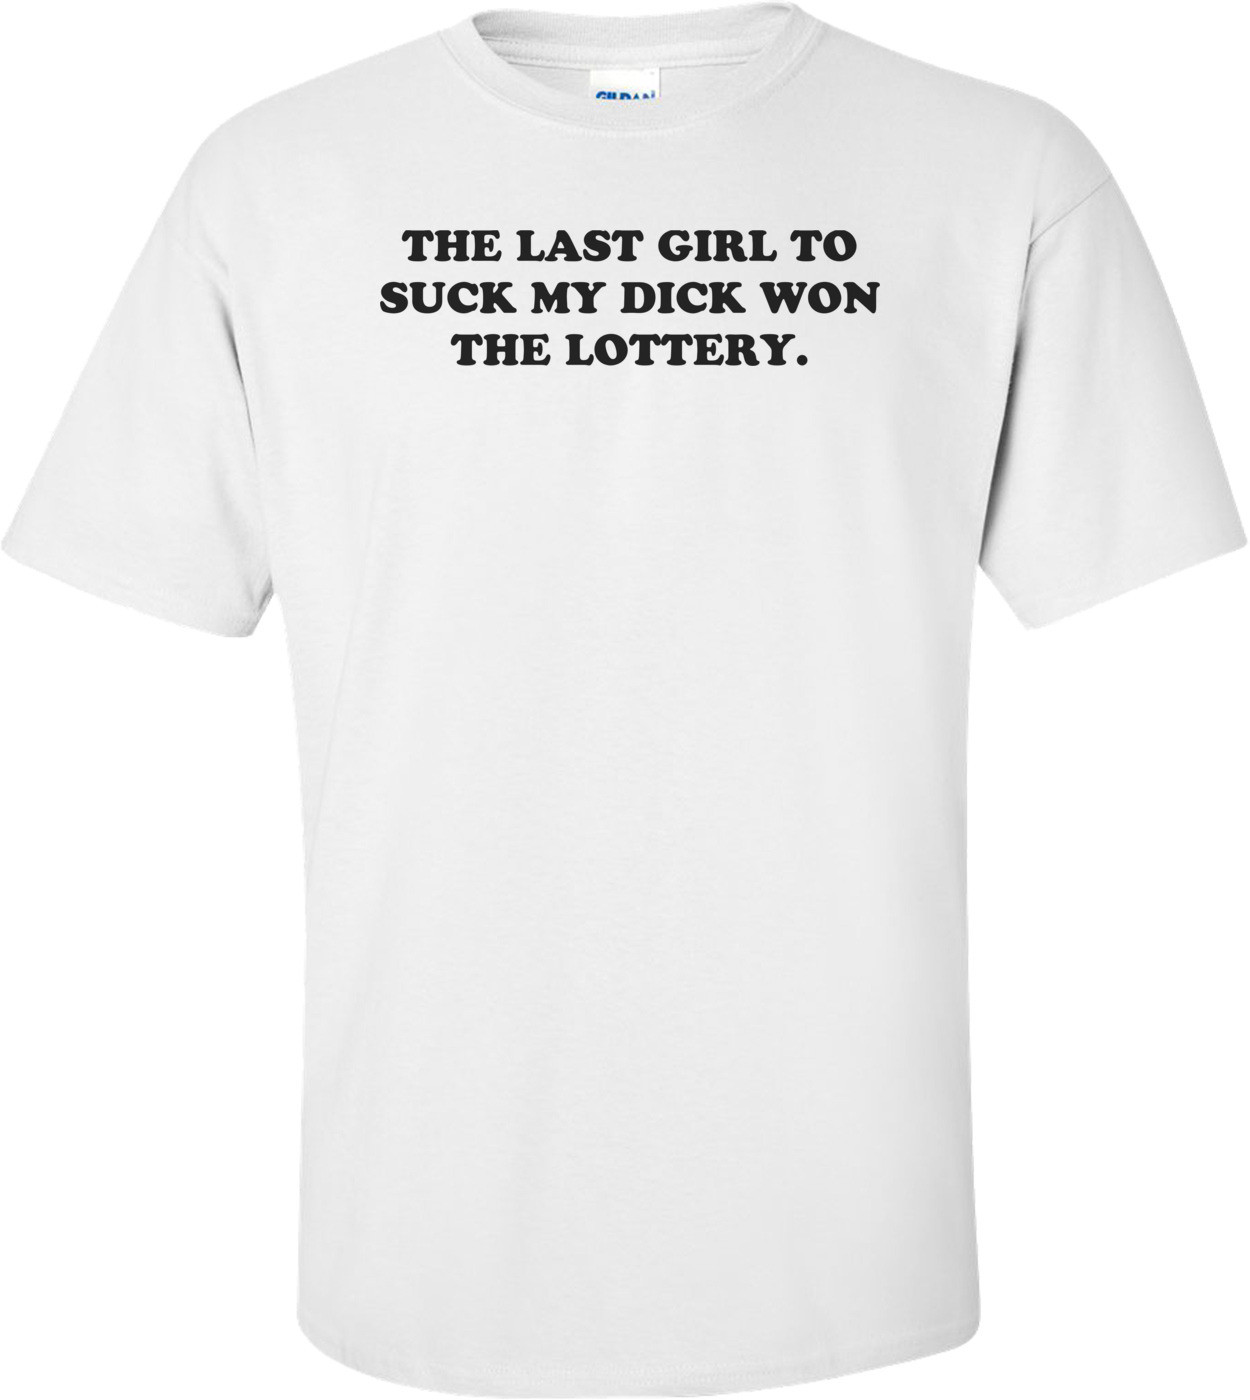 THE LAST GIRL TO SUCK MY DICK WON THE LOTTERY. Shirt